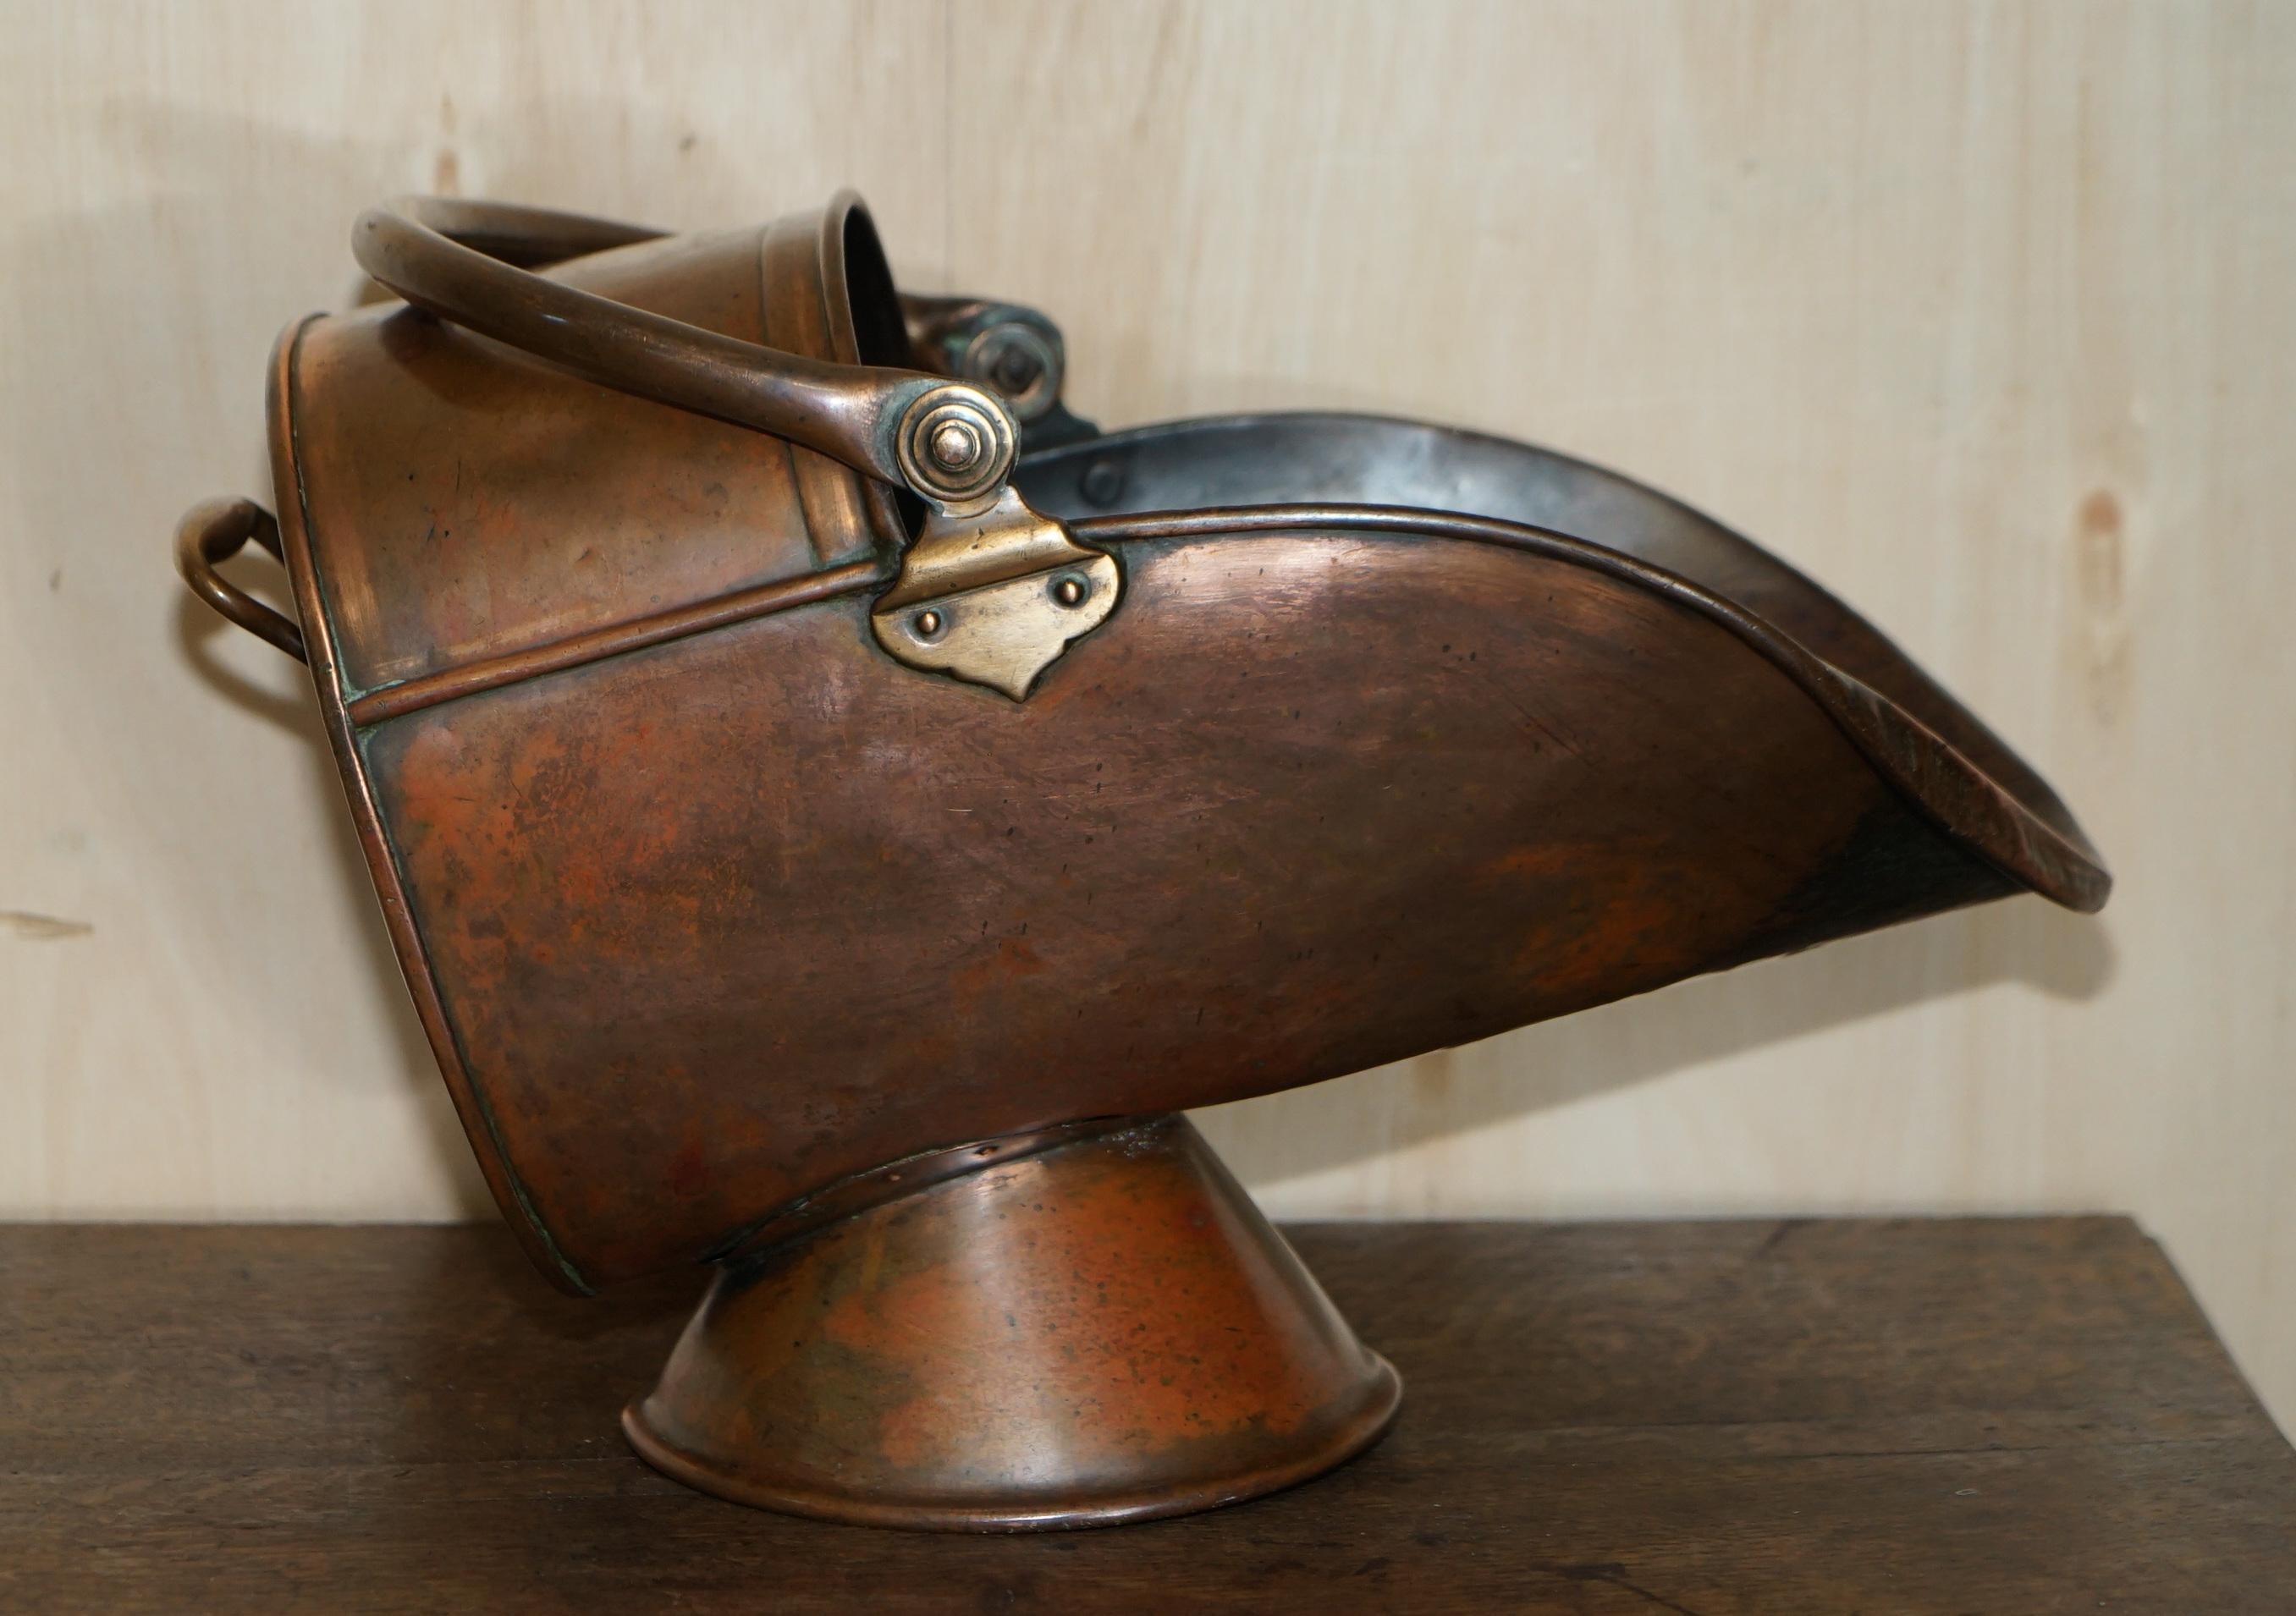 We are delighted to offer for sale this lovely original hand hammered English circa 1860 copper and brass coal scuttle.
This was called a helmet scuttle for obvious reasons, it looks like a Knights helmet. The body is made of hand hammered copper